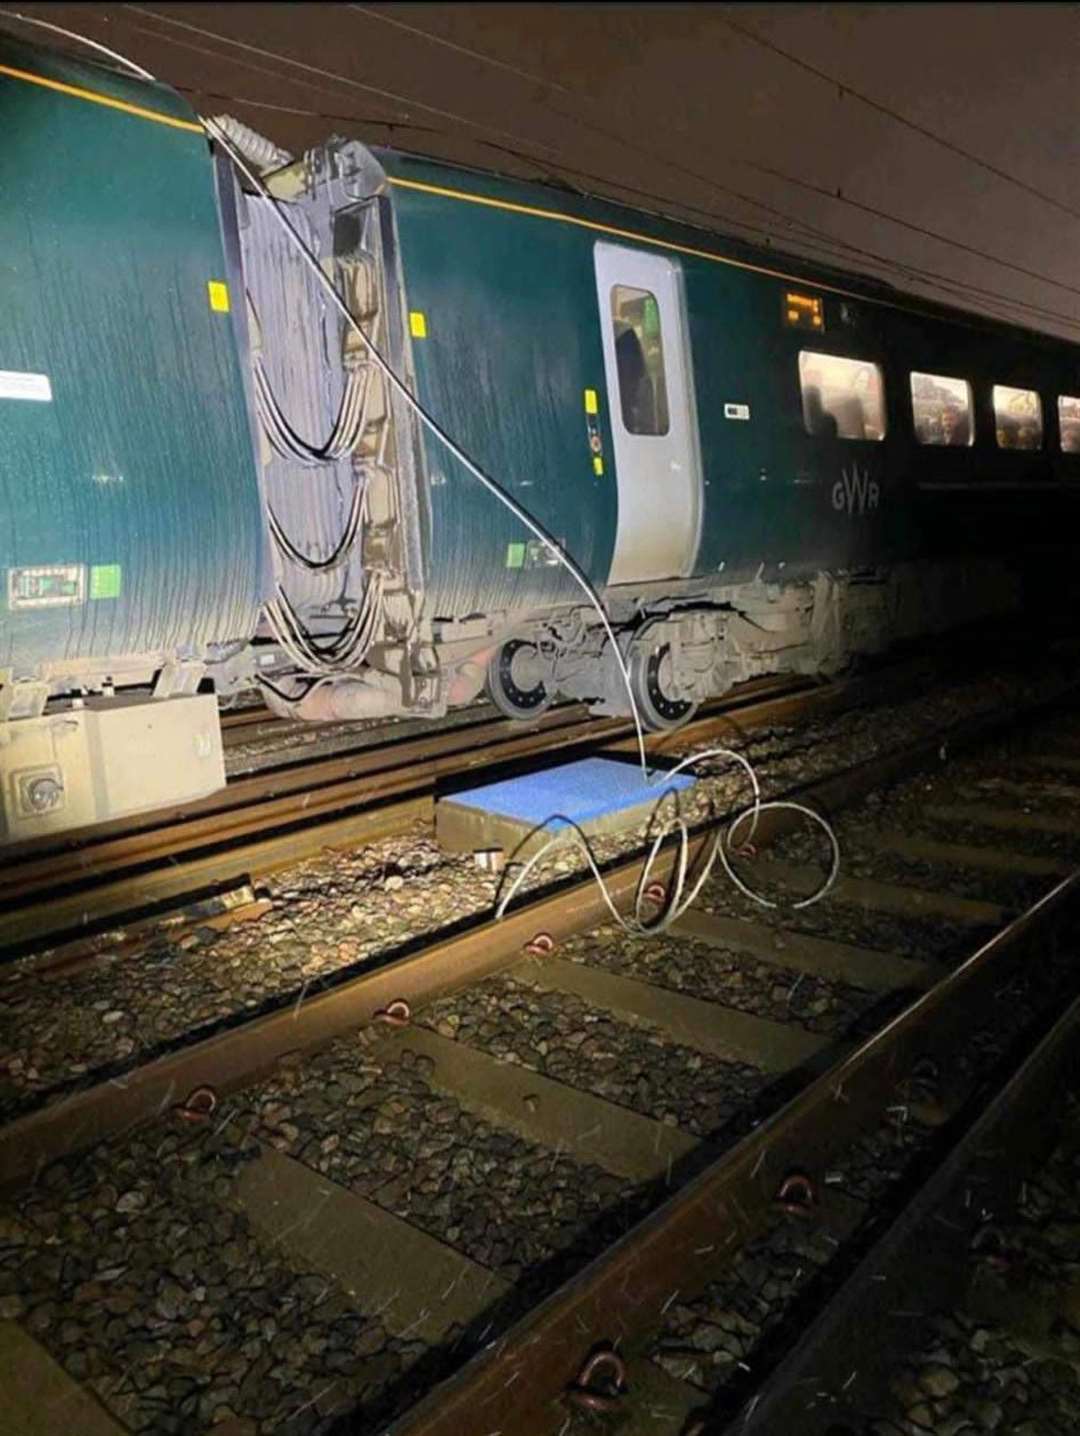 The train with damaged overhead electric cables in the Ladbroke Grove area of west London (Aslef/PA)